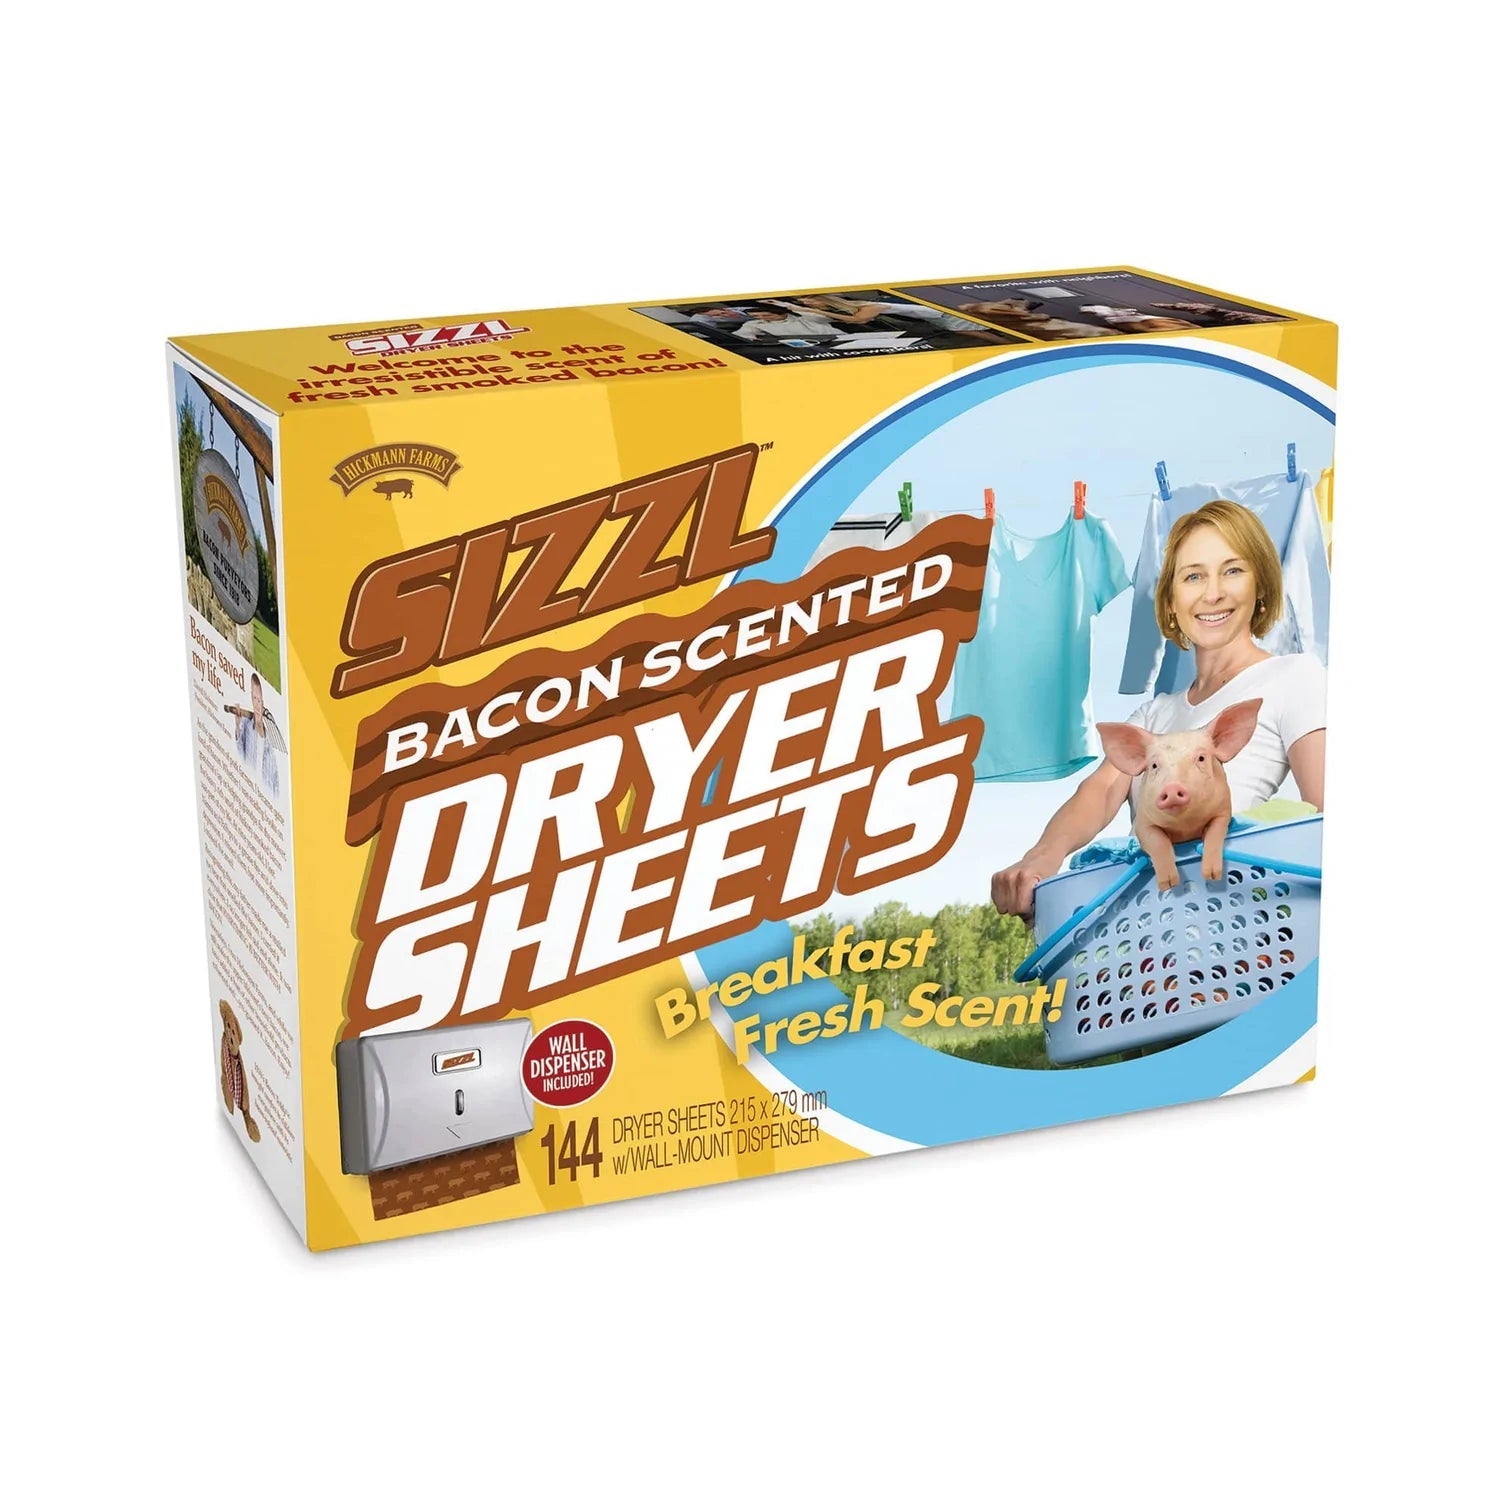 Bacon Scented Dryer Sheets - Prank Gift Box Pranks Anonymous send hilarious pranks and gag gifts to your friends or family.